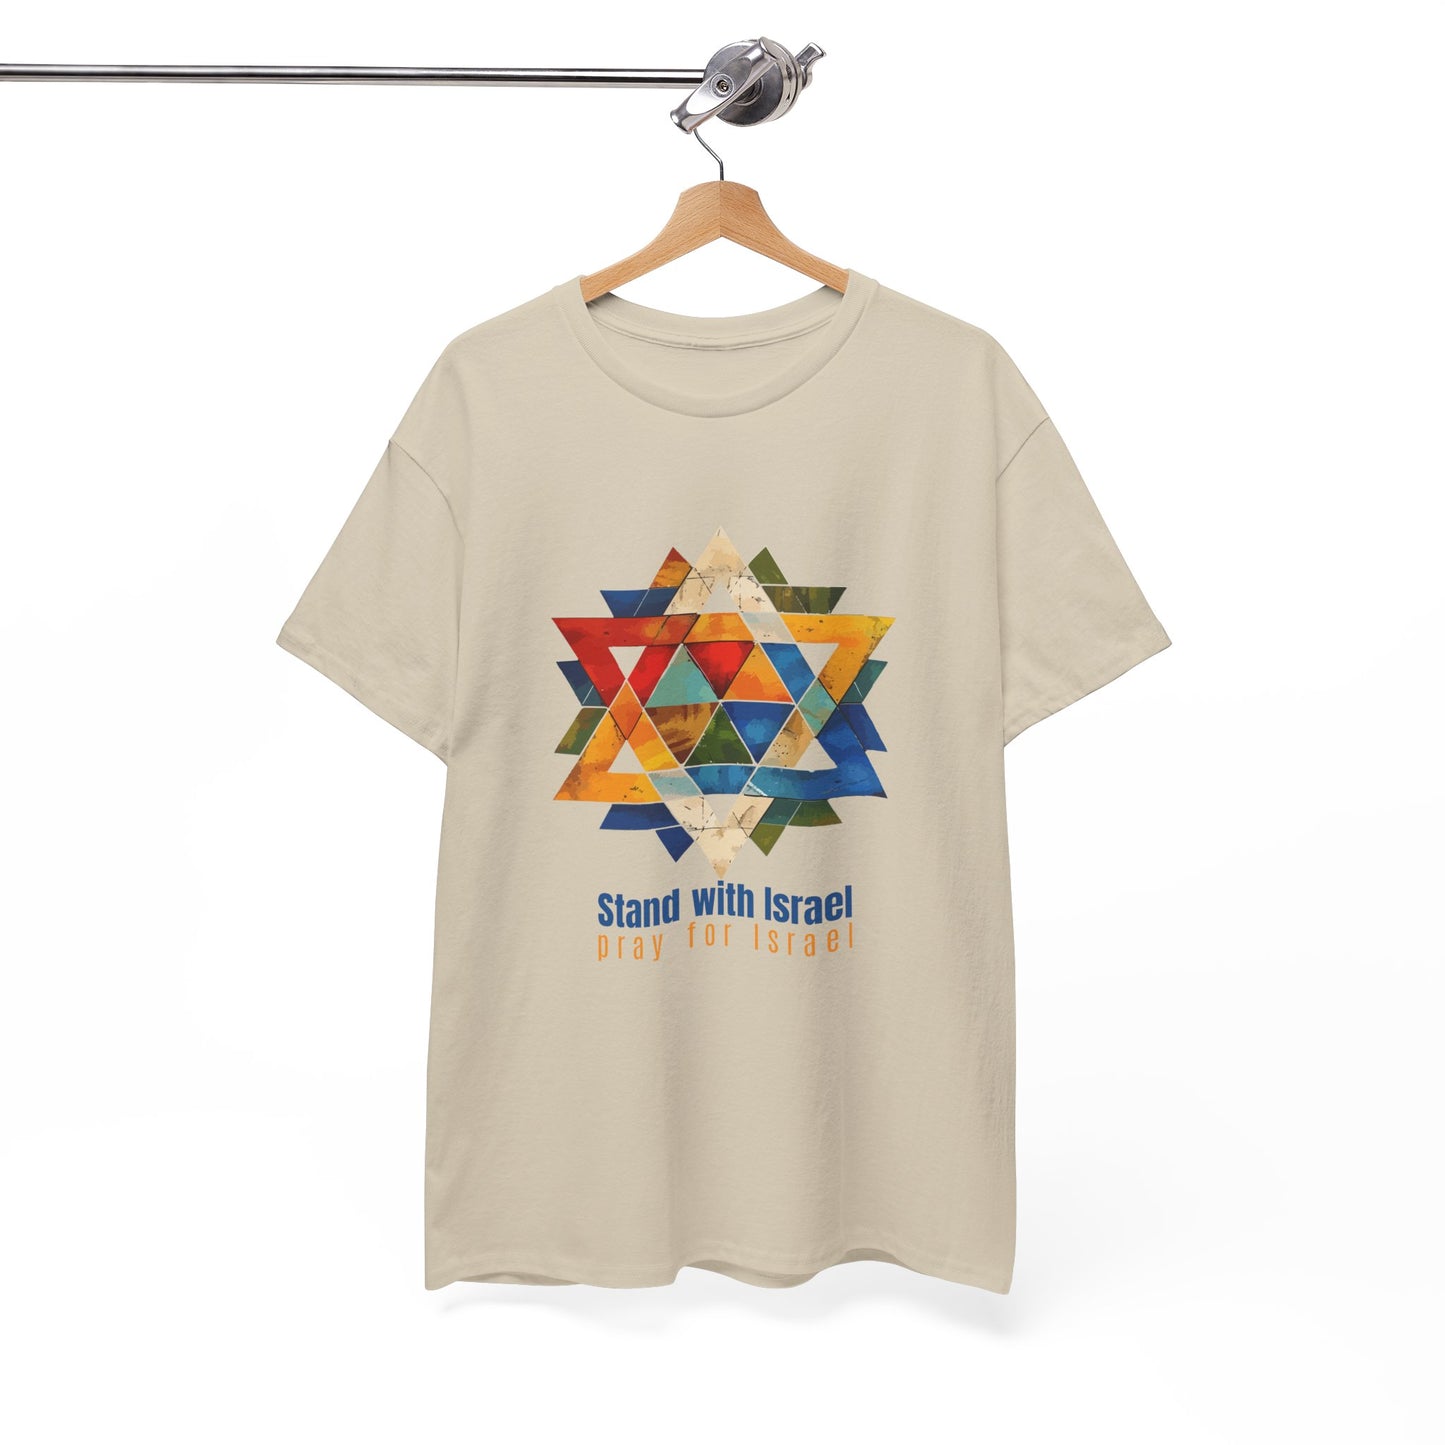 Stand with Israel Pray for Israel Cotton Unisex Tee Shirt